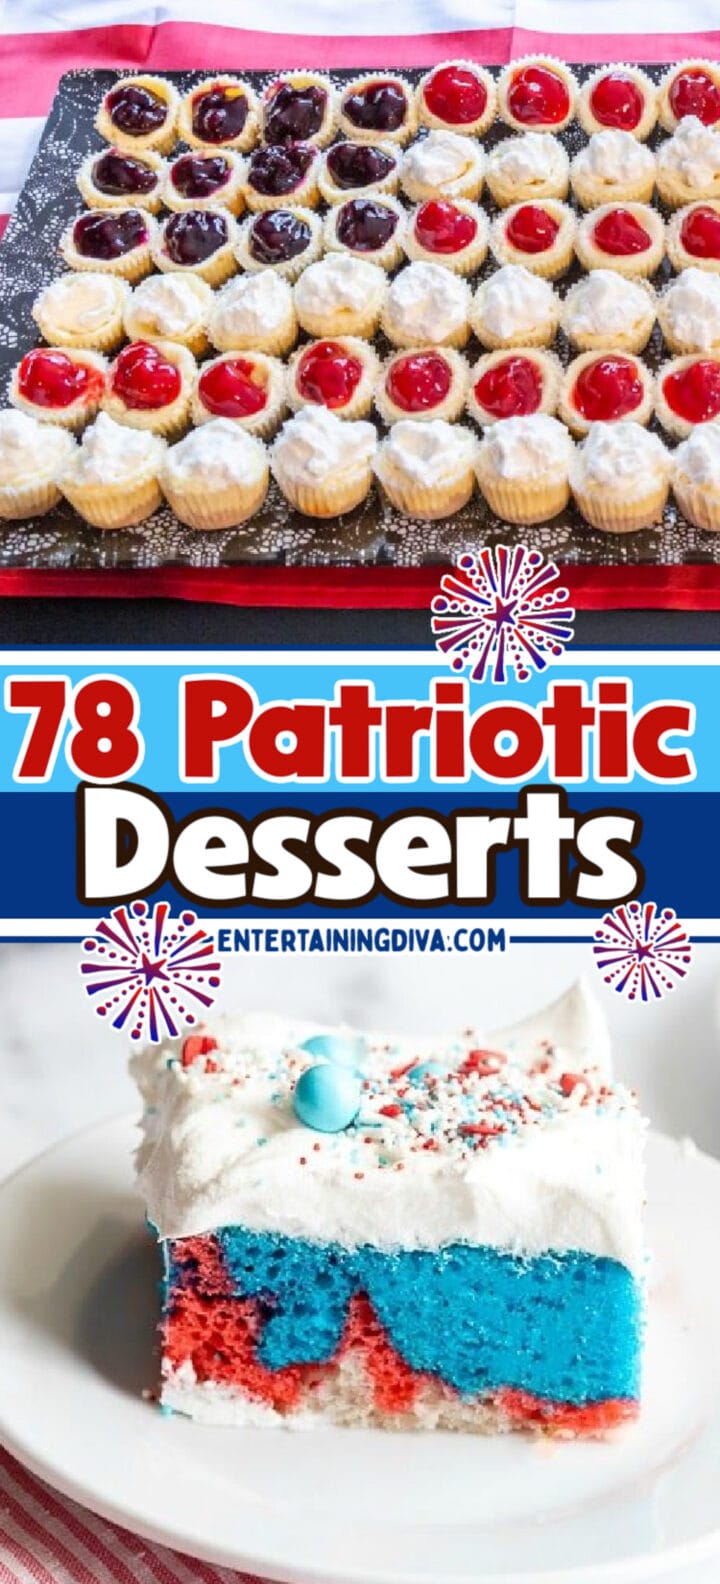 79 Patriotic Red, White and Blue Desserts For The 4th of July